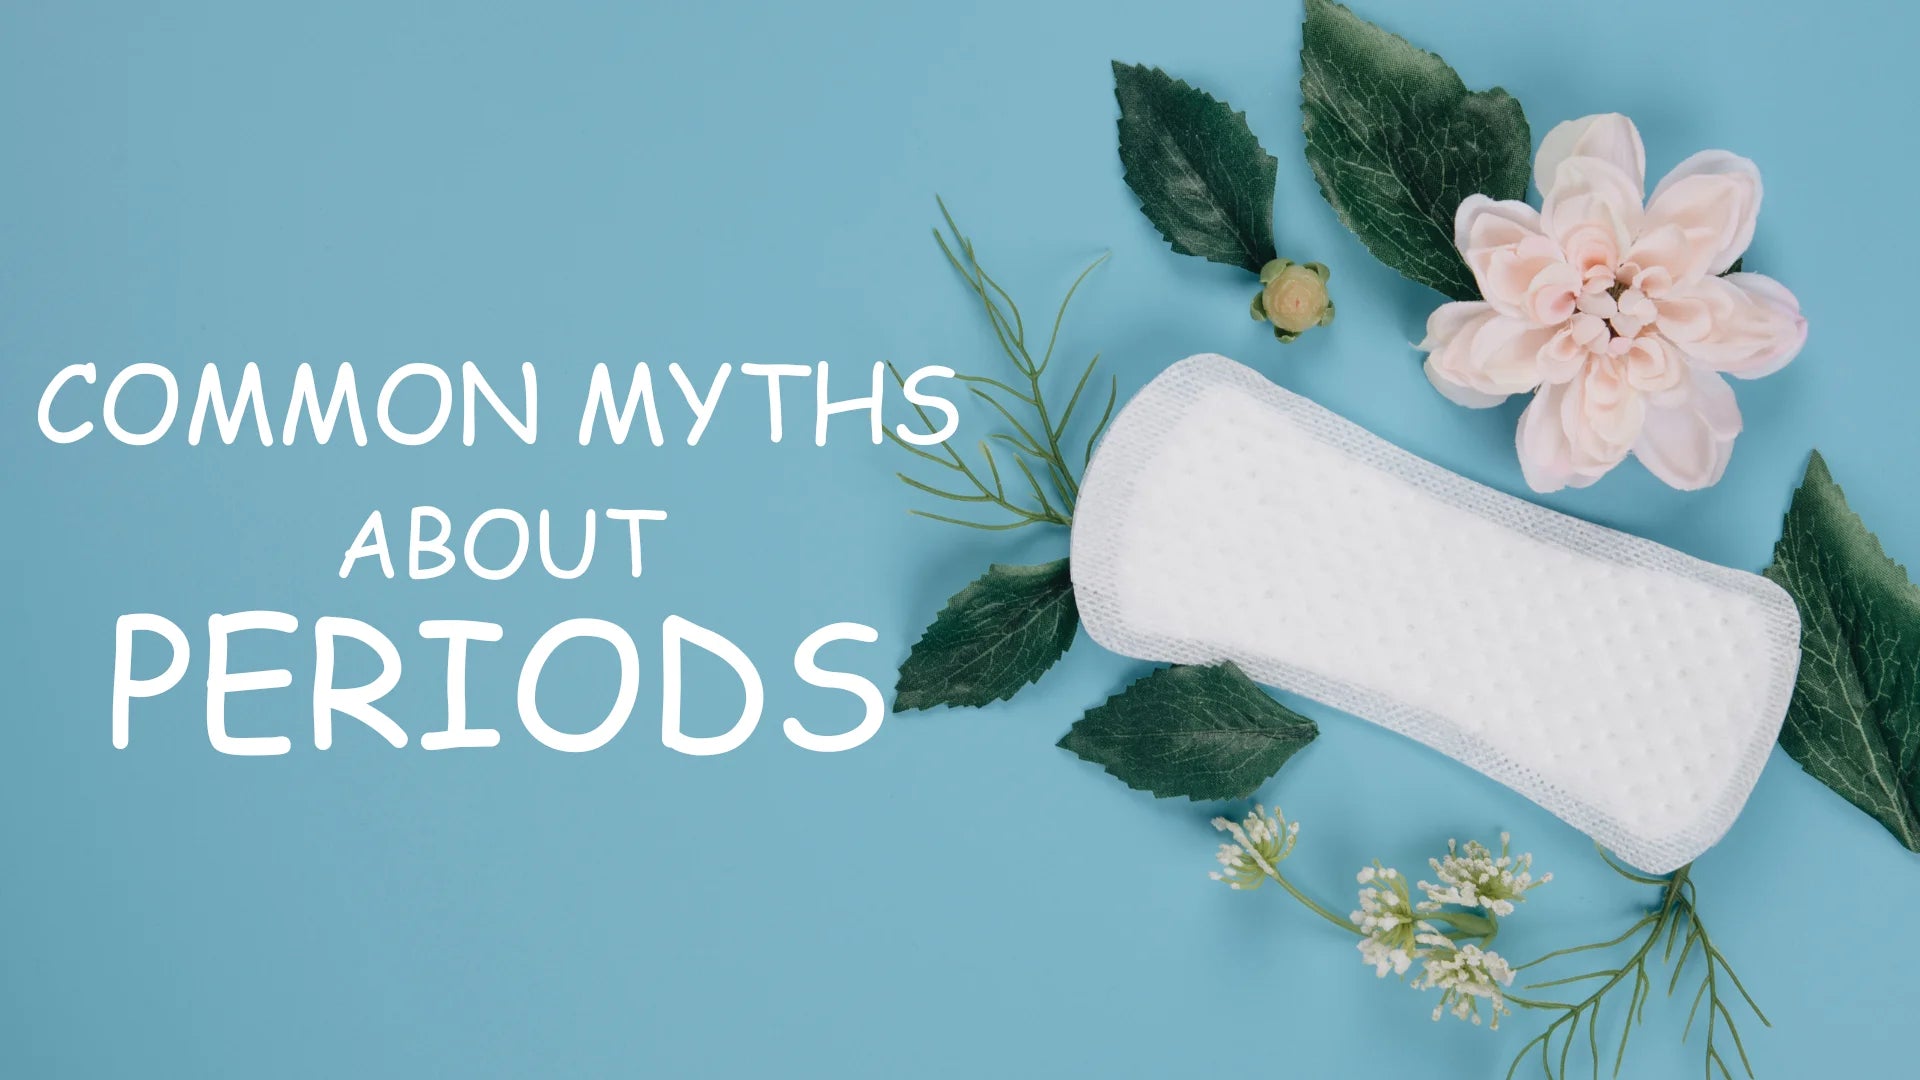 Misconceptions about Periods: Feminine Health Concerns